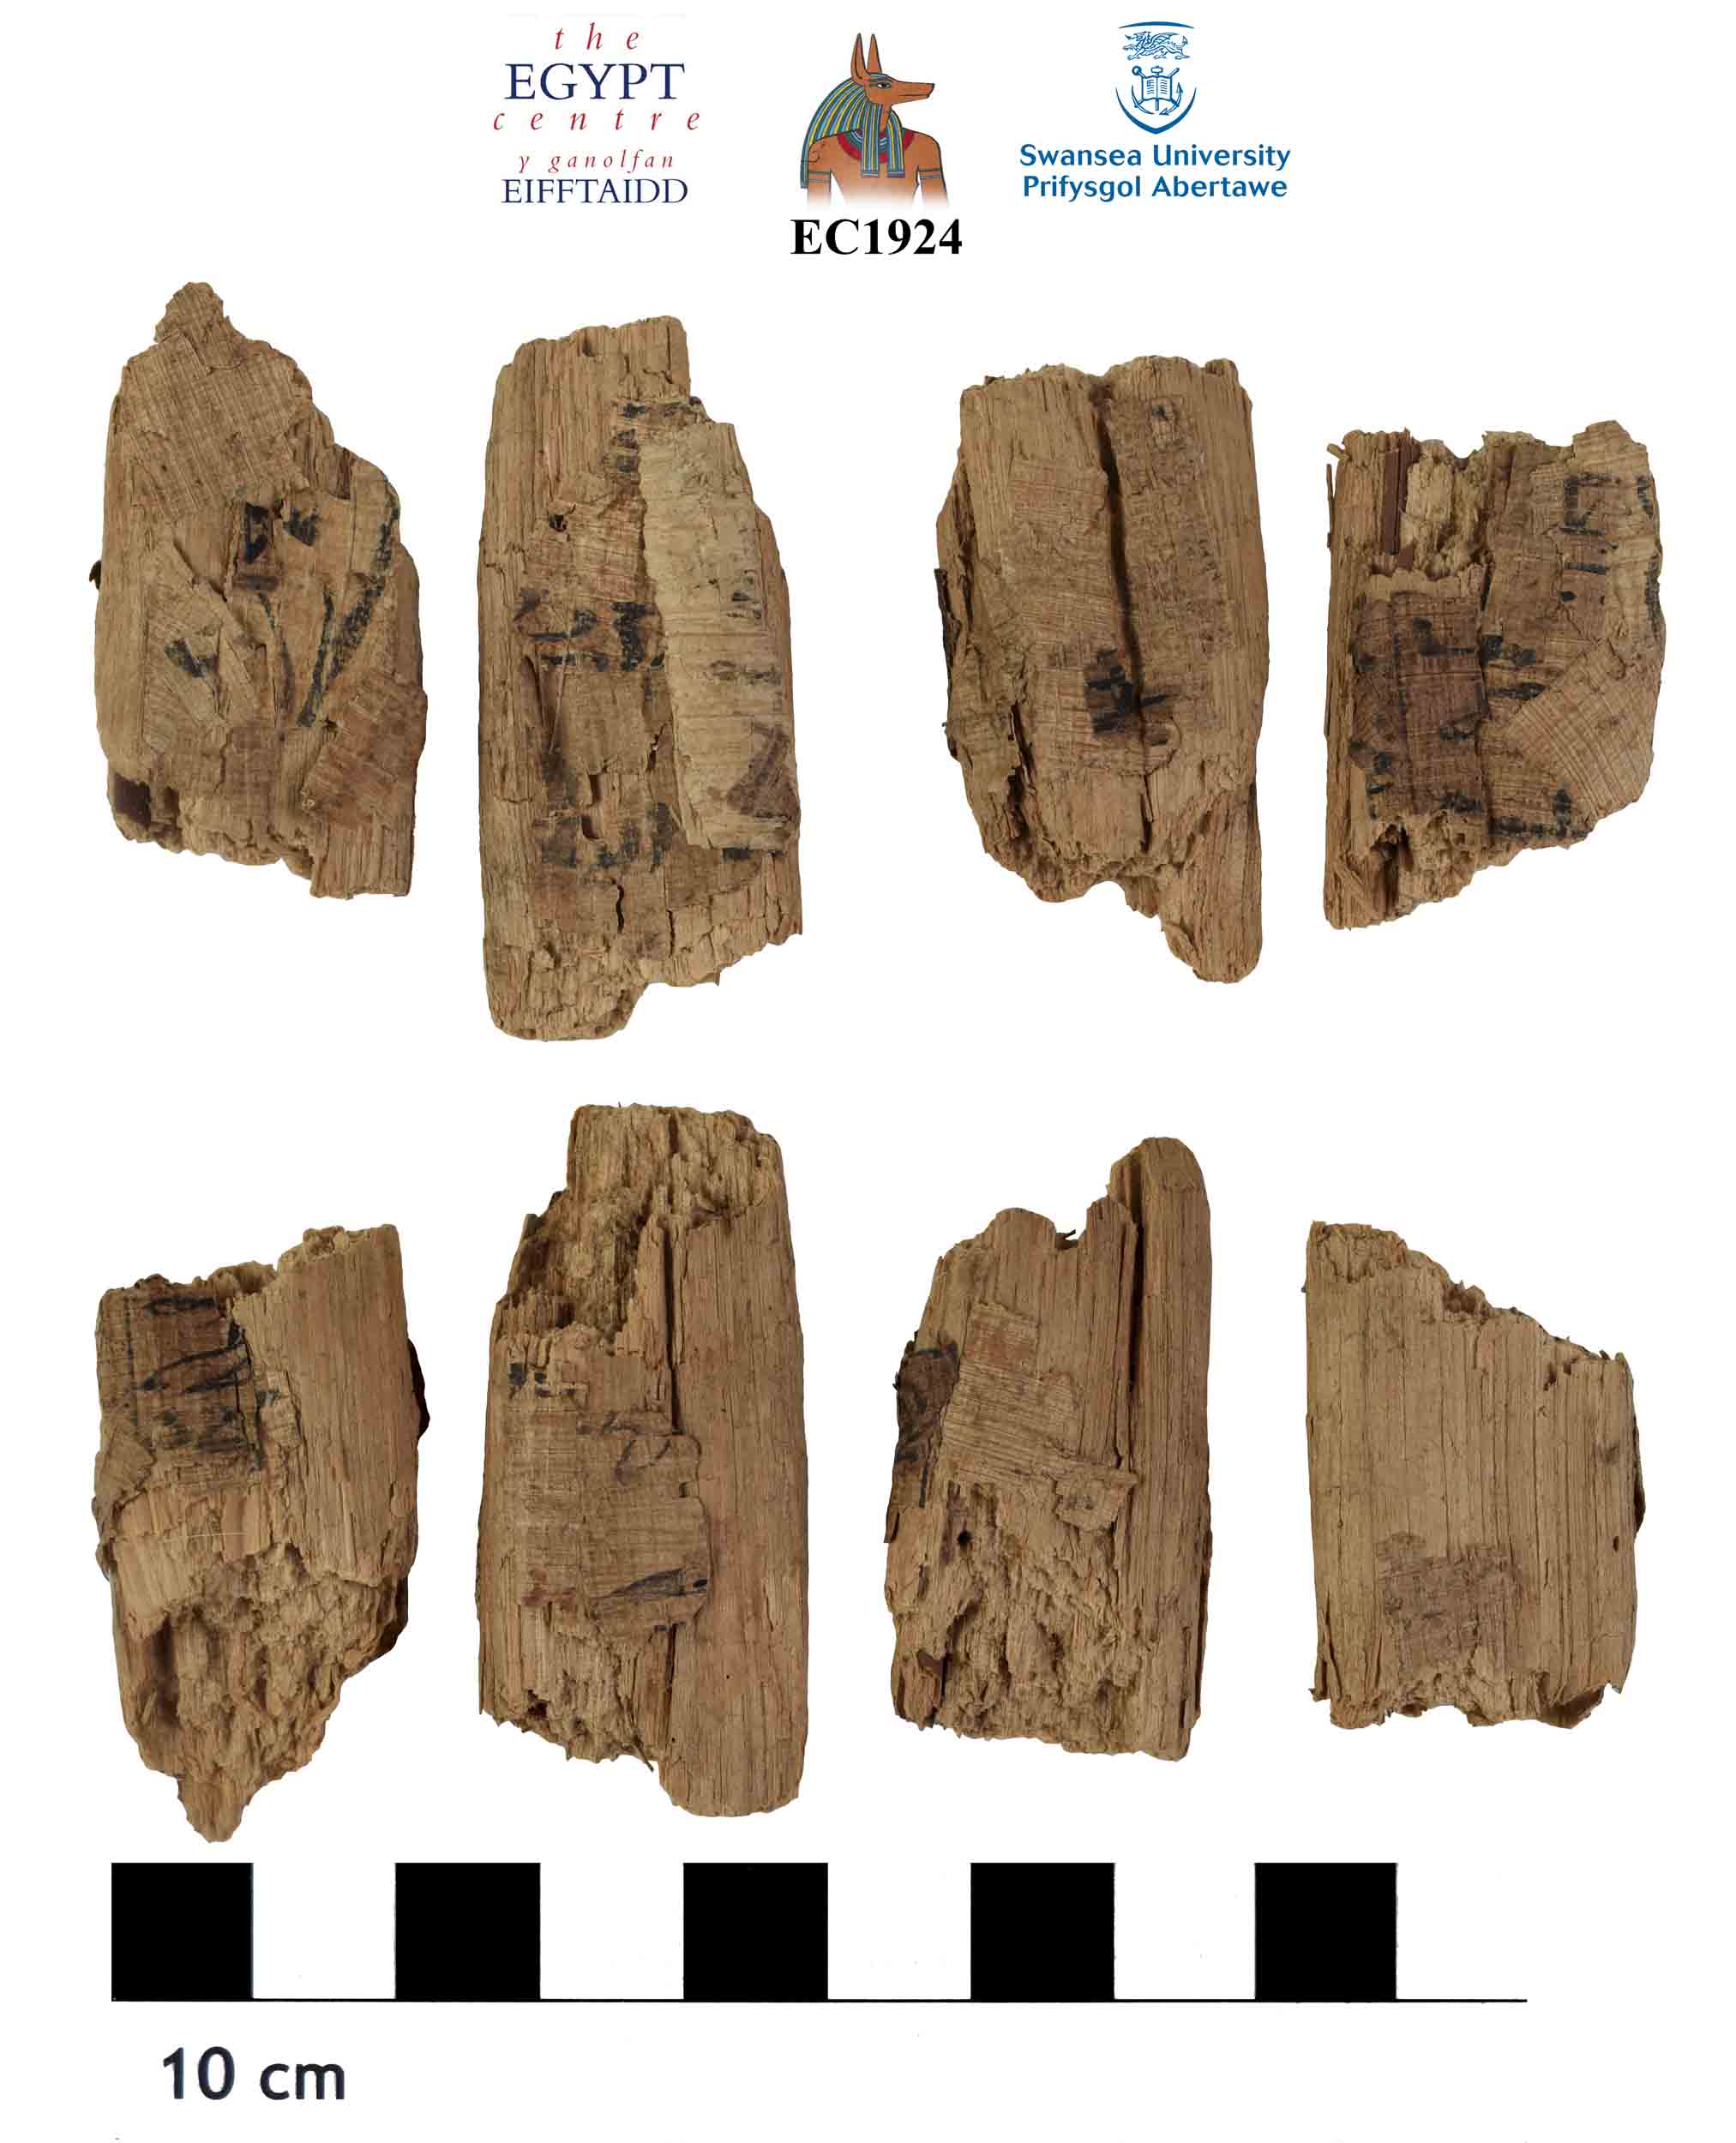 Image for: Fragments of plant stem with scraps of papyrus attached